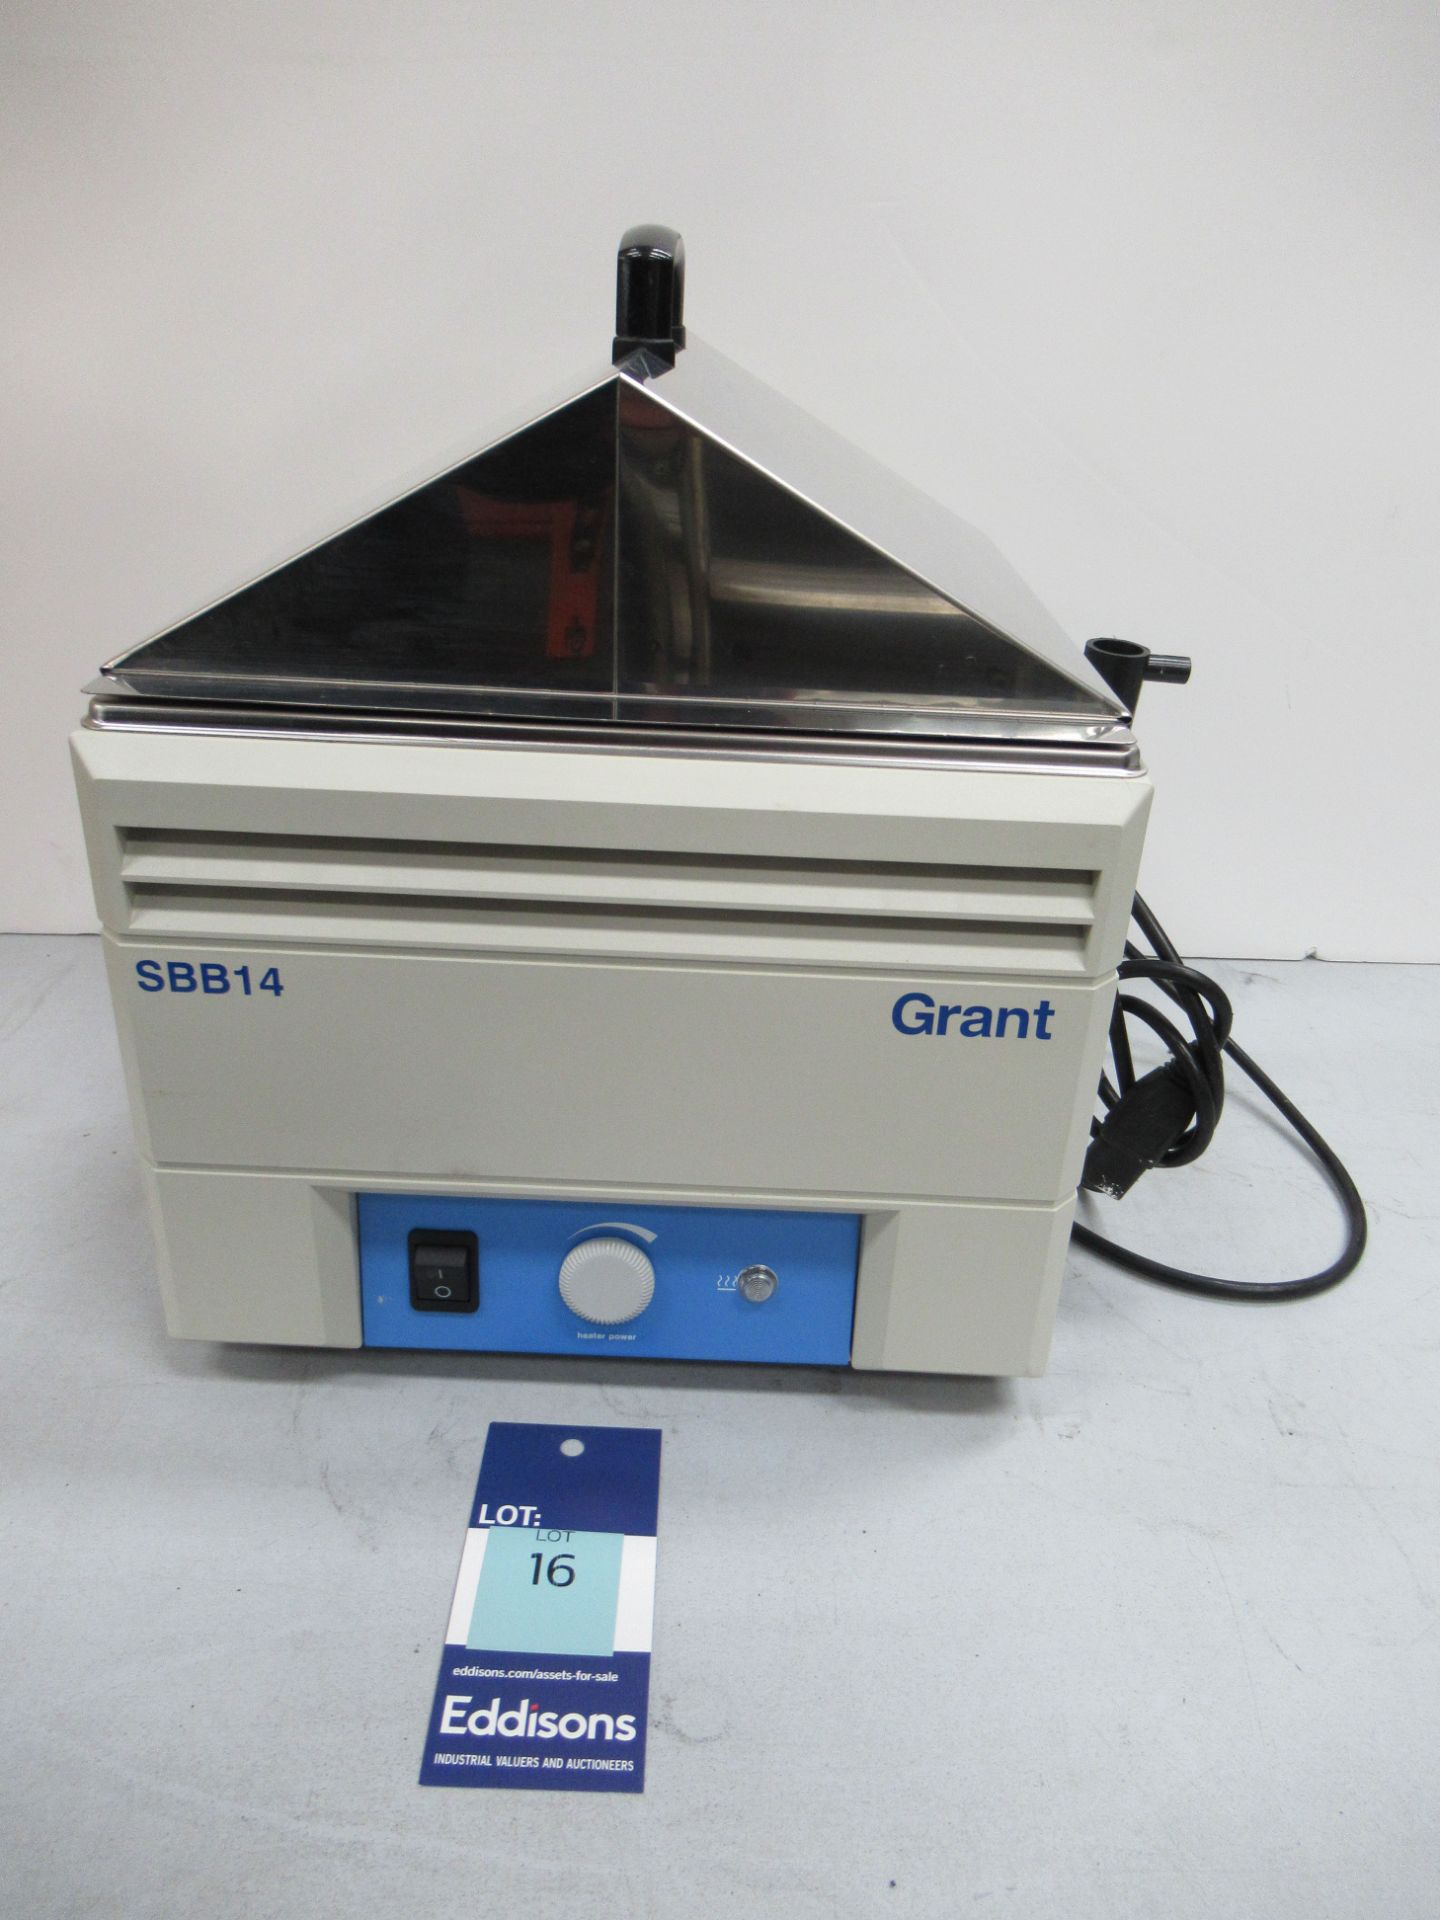 Grant SBB14 Heated Water Bath with Lid